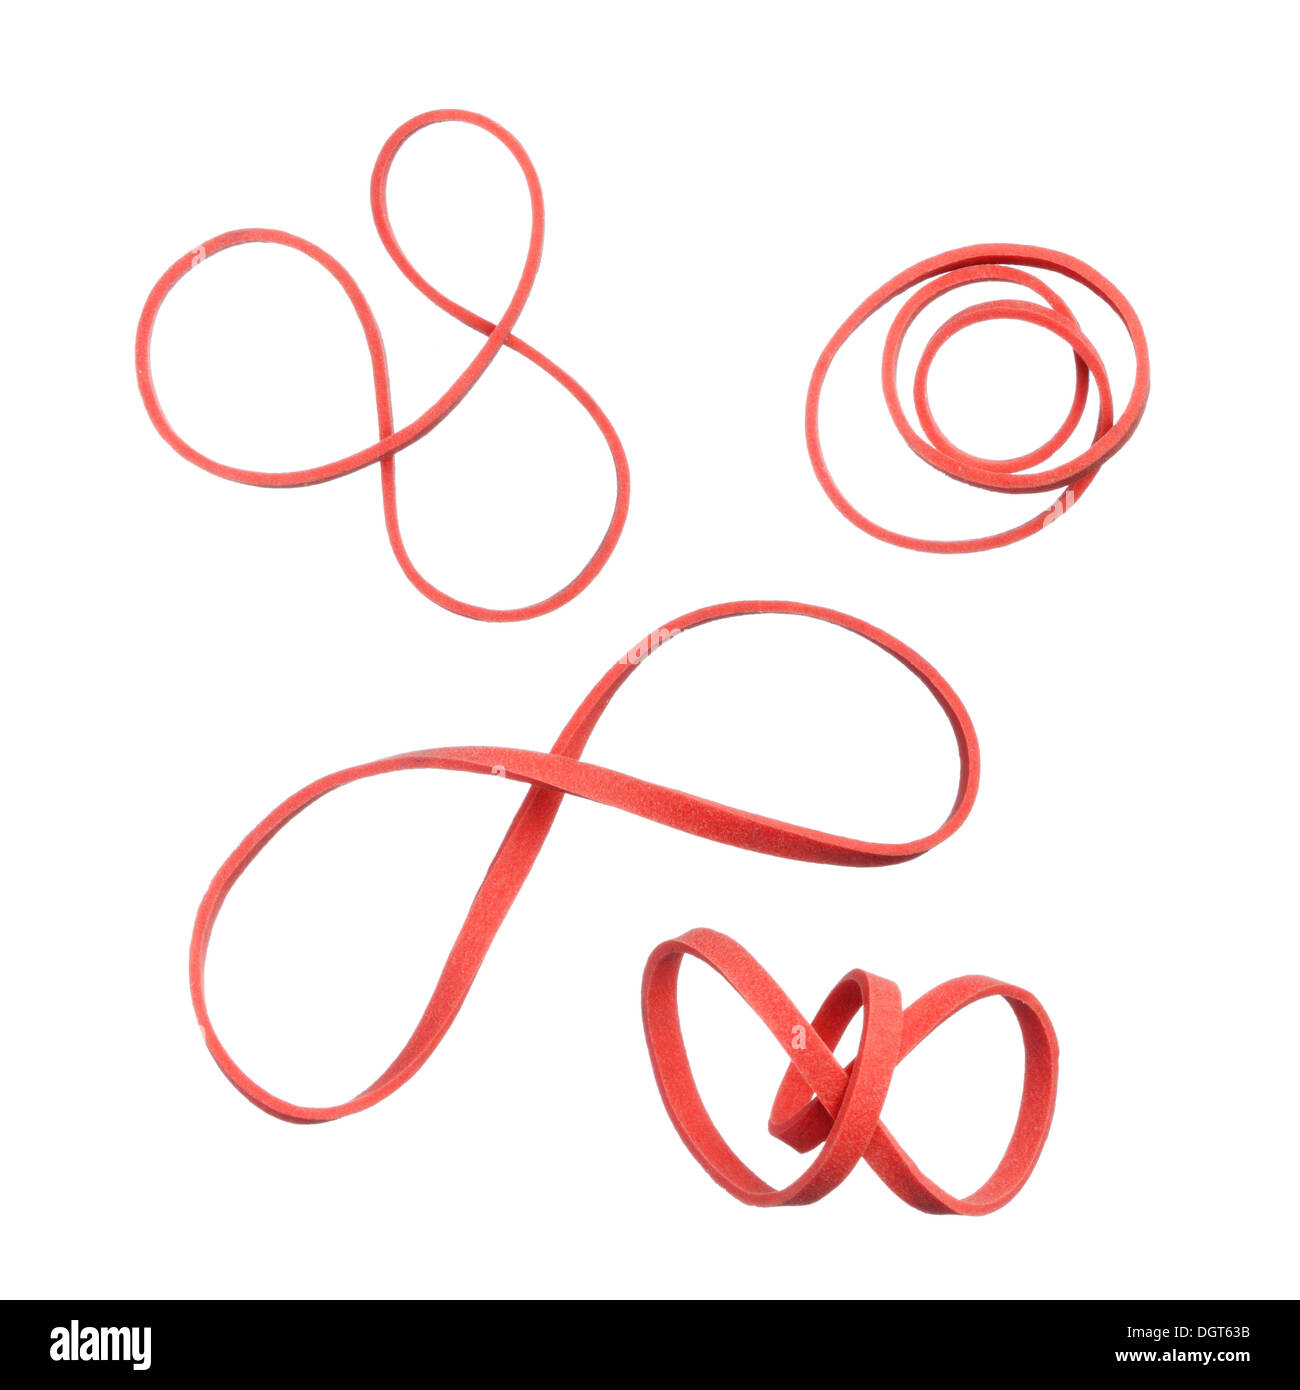 Twisted red elastic rubber bands isolated on white background Stock Photo